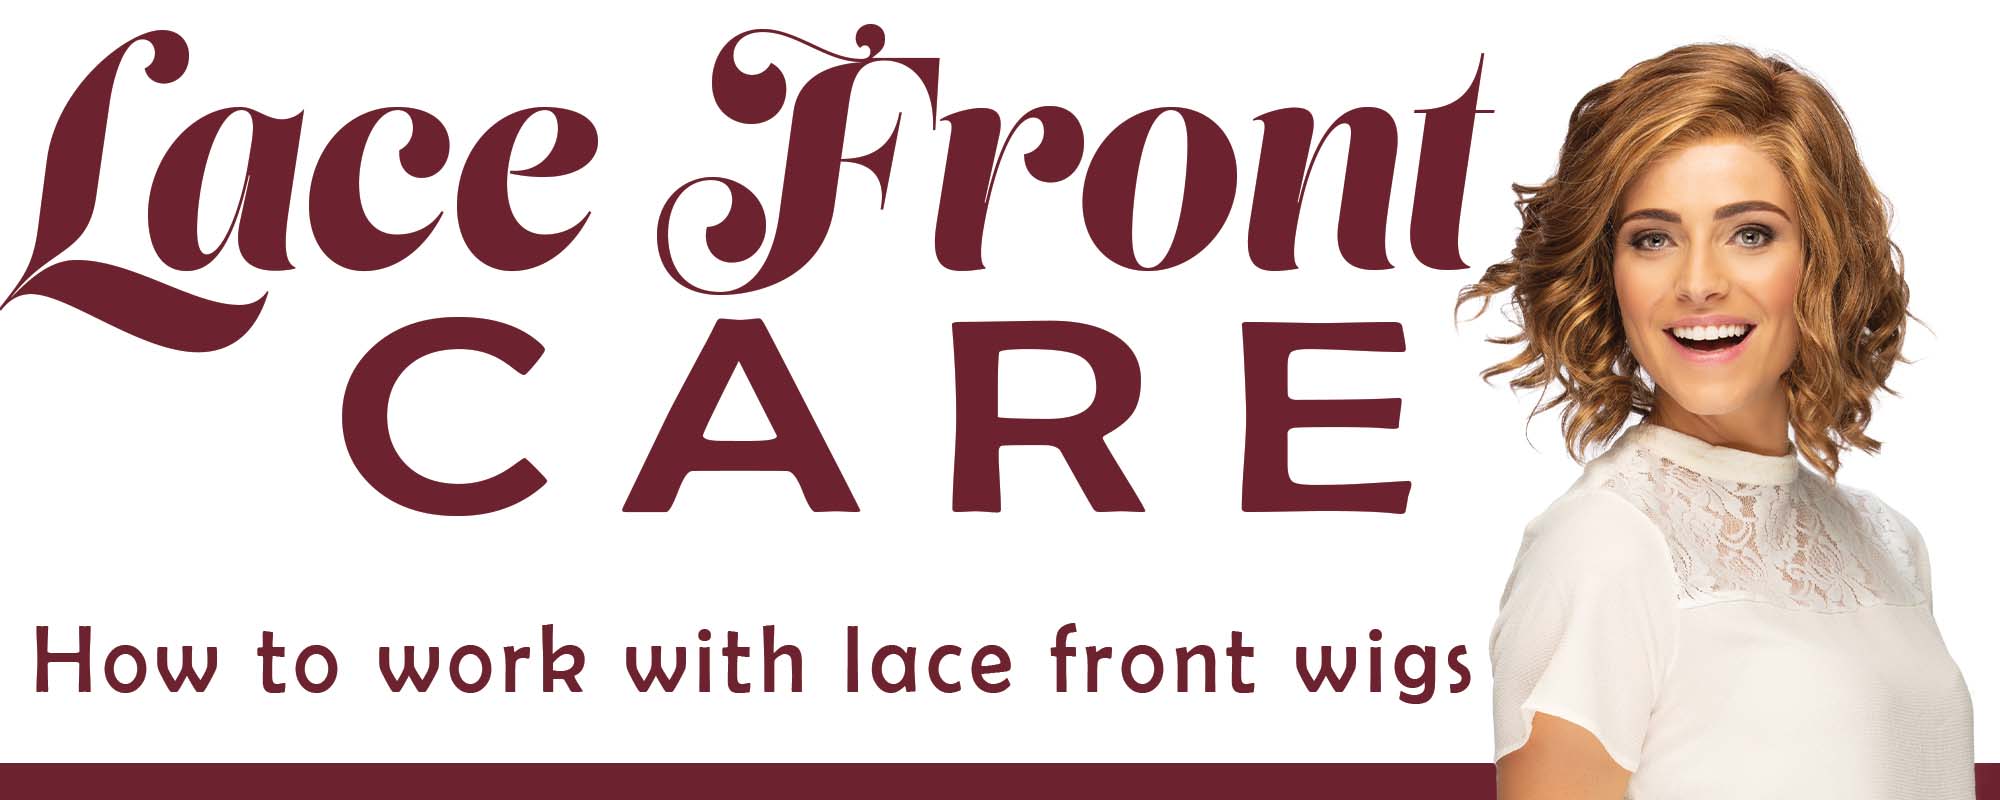 PhenomenalhairCare: Fray Block: Lace Front Wig Cutting Suggestion